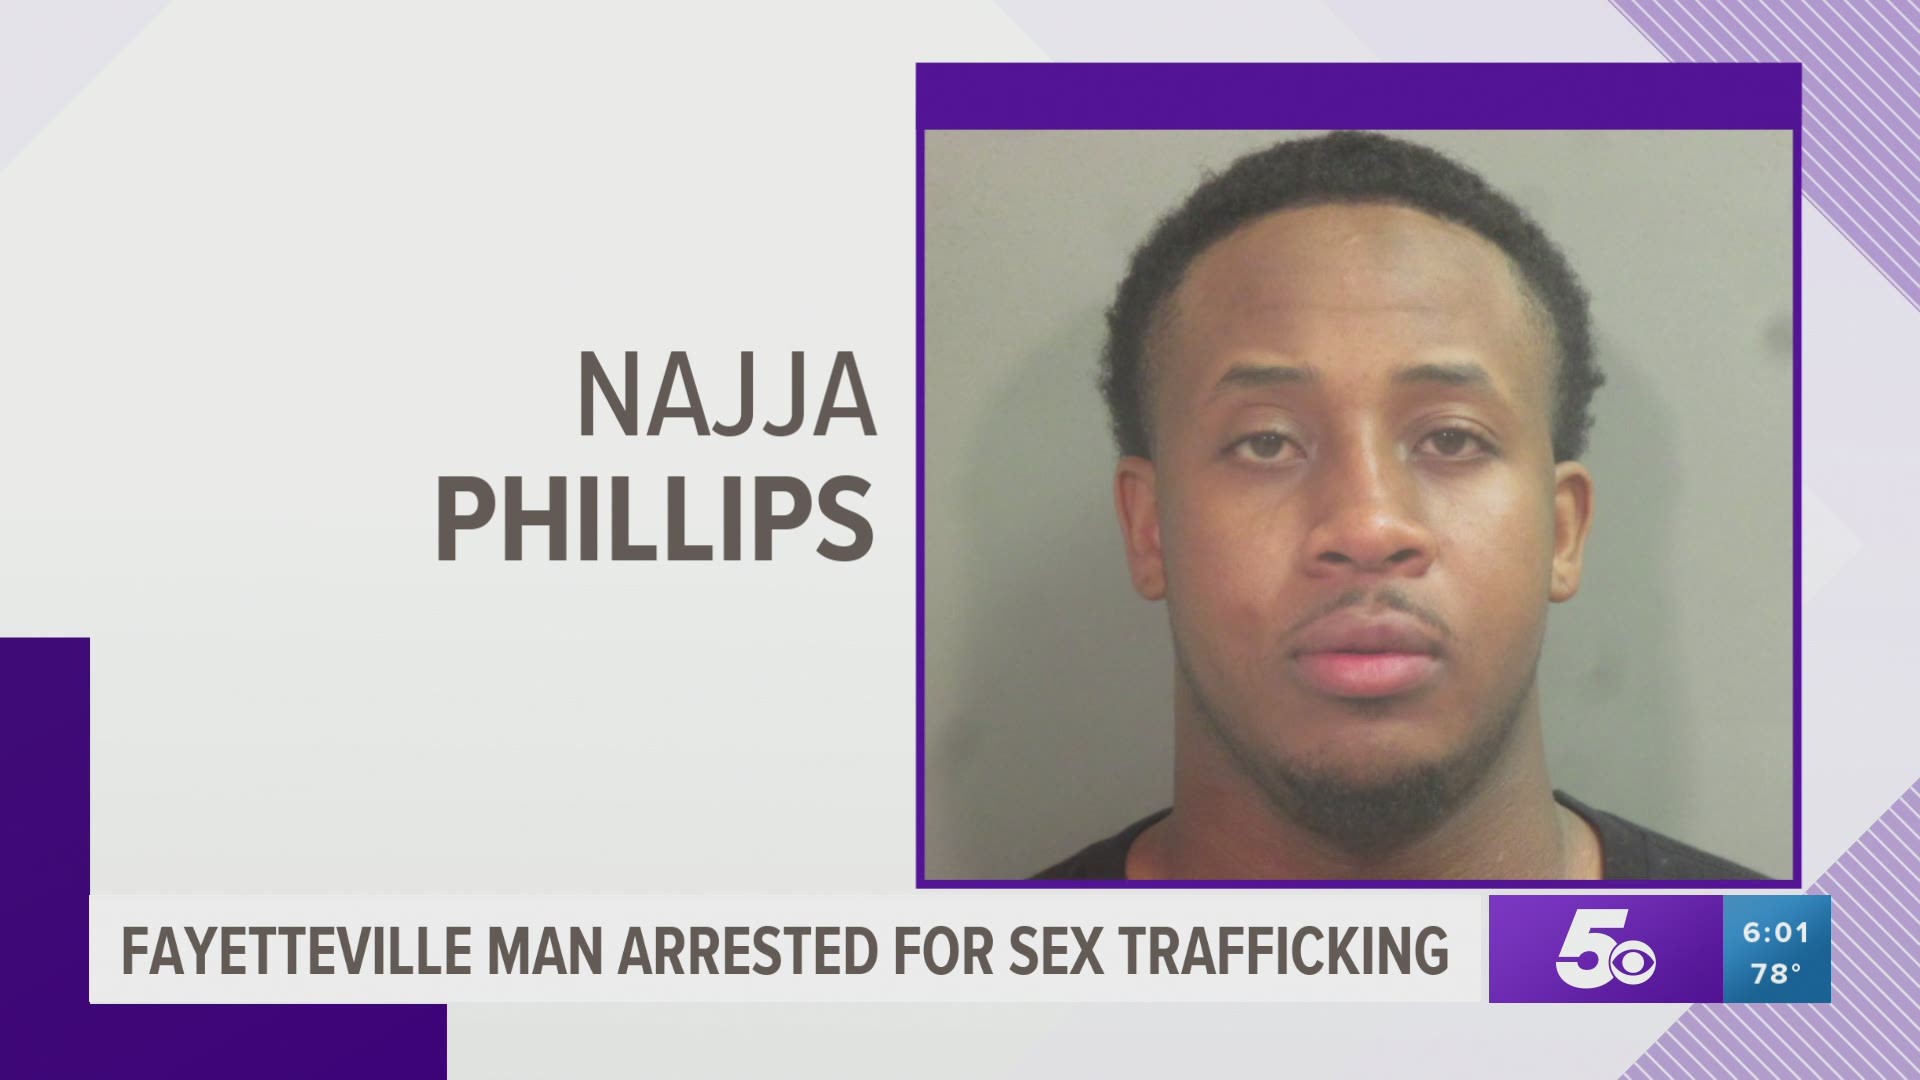 26-year-old Najja Phillips was the subject of their raid, according to Connor Hagen with the Little Rock FBI office.